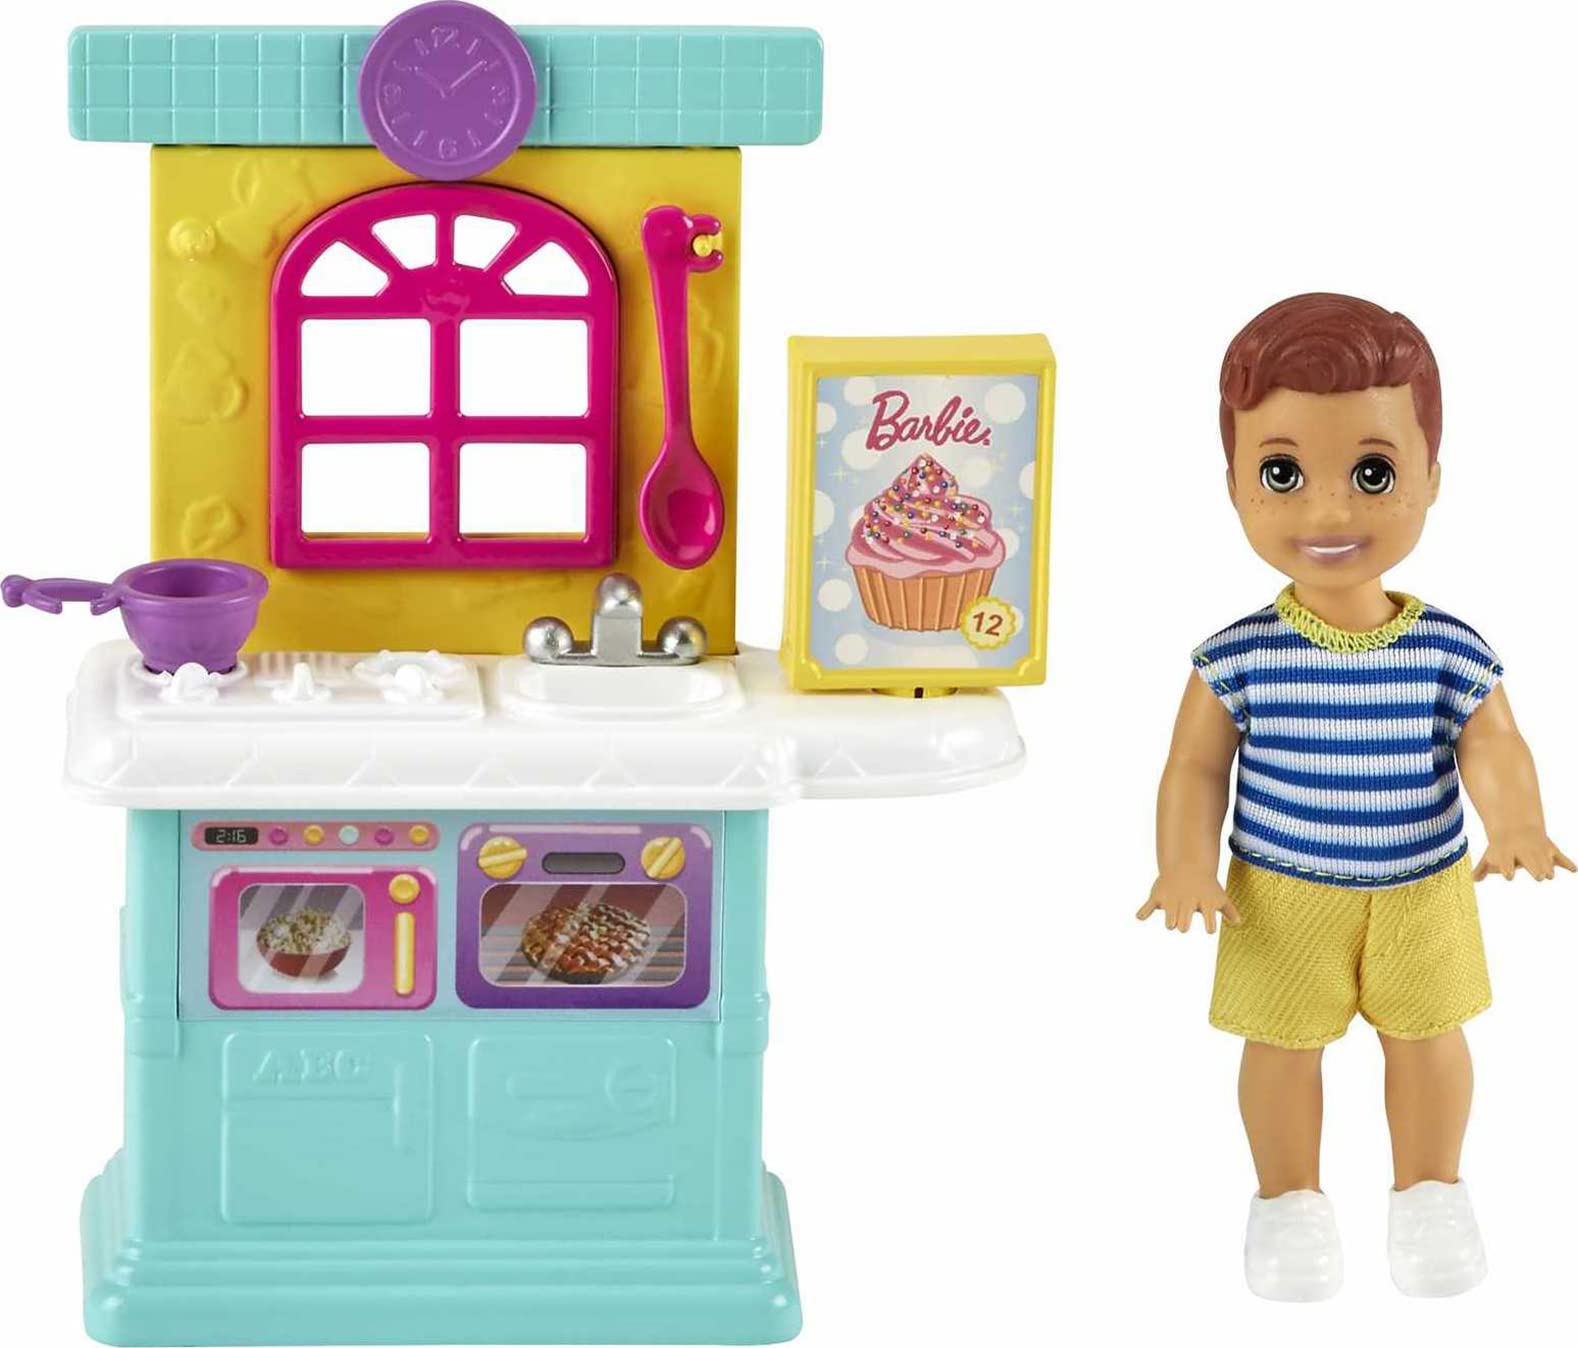 Barbie Skipper Babysitters Inc. Accessories Set with Small Toddler Doll & Kitchen Playset, Plus Dessert Mix Box, Bowl & Spoon, Gift for 3 to 7 Year Olds , White